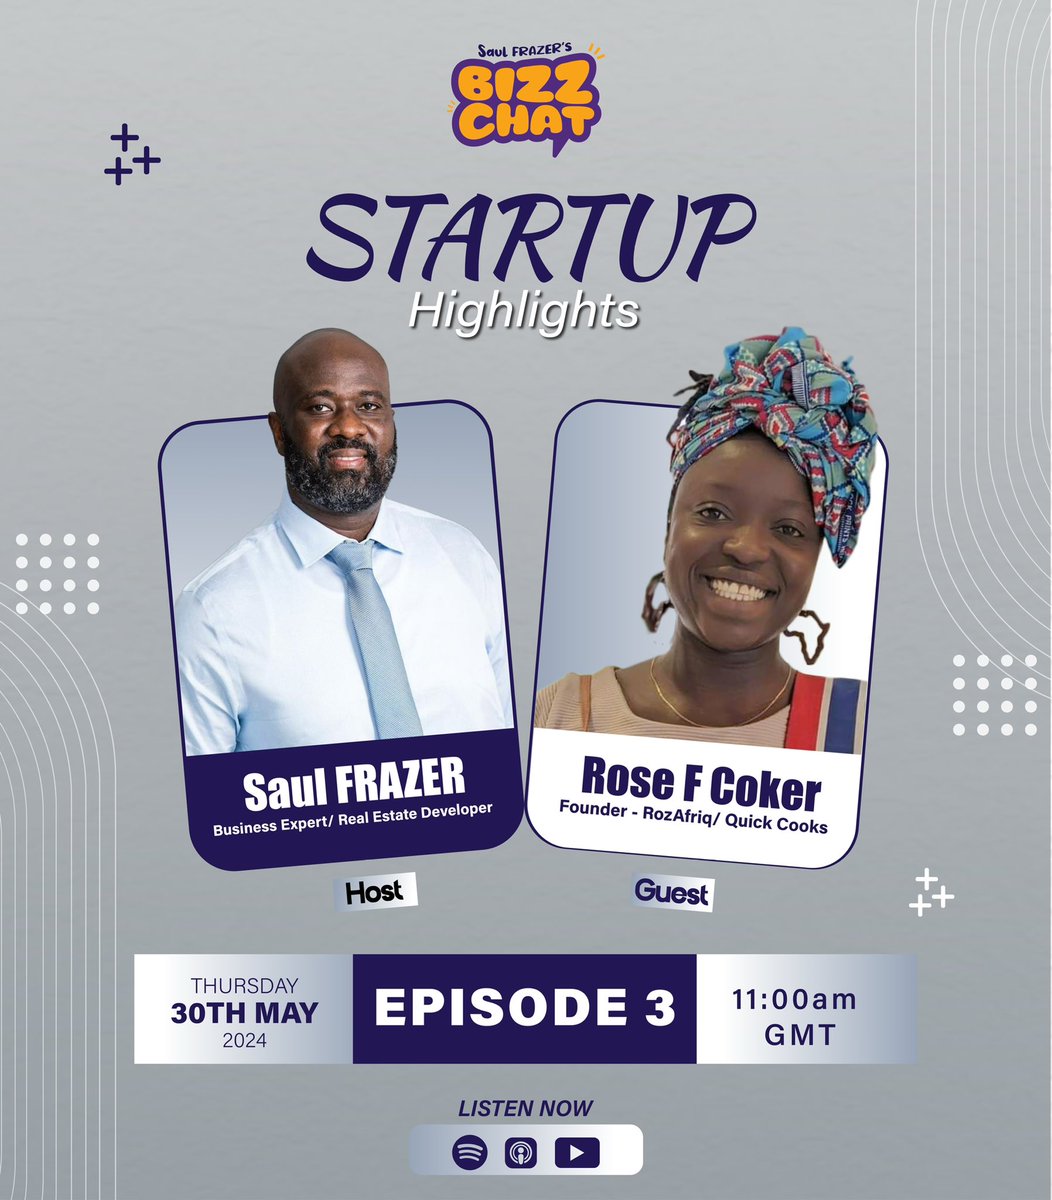 Startup highlight on Saul FRAZER’s #BizzChat and Rose F Coker - founder of @BoromRozAfriq is our guest on Episode 3. 

Our conversation highlights her journey in the business world and challenges entrepreneurs face. 

Listen on: linktr.ee/sfbizzchat 

#SaulFRAZER